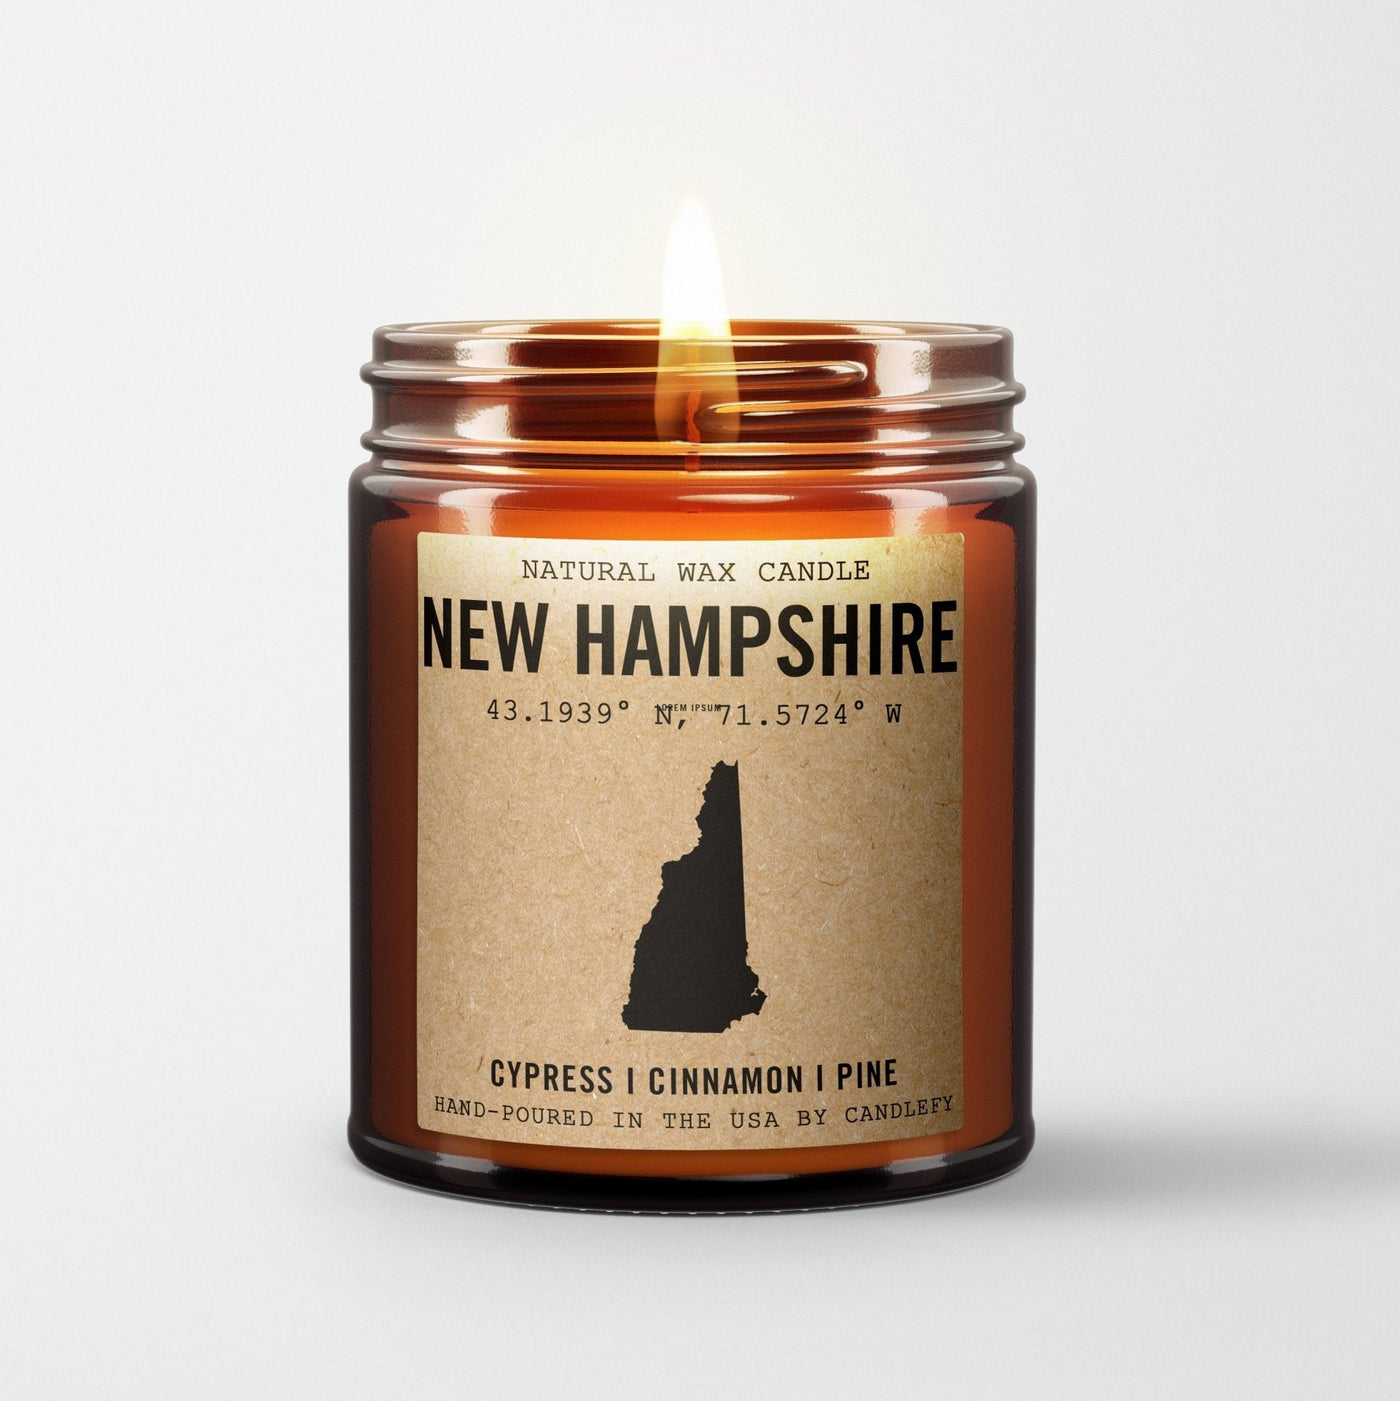 New Hampshire Homestate Candle